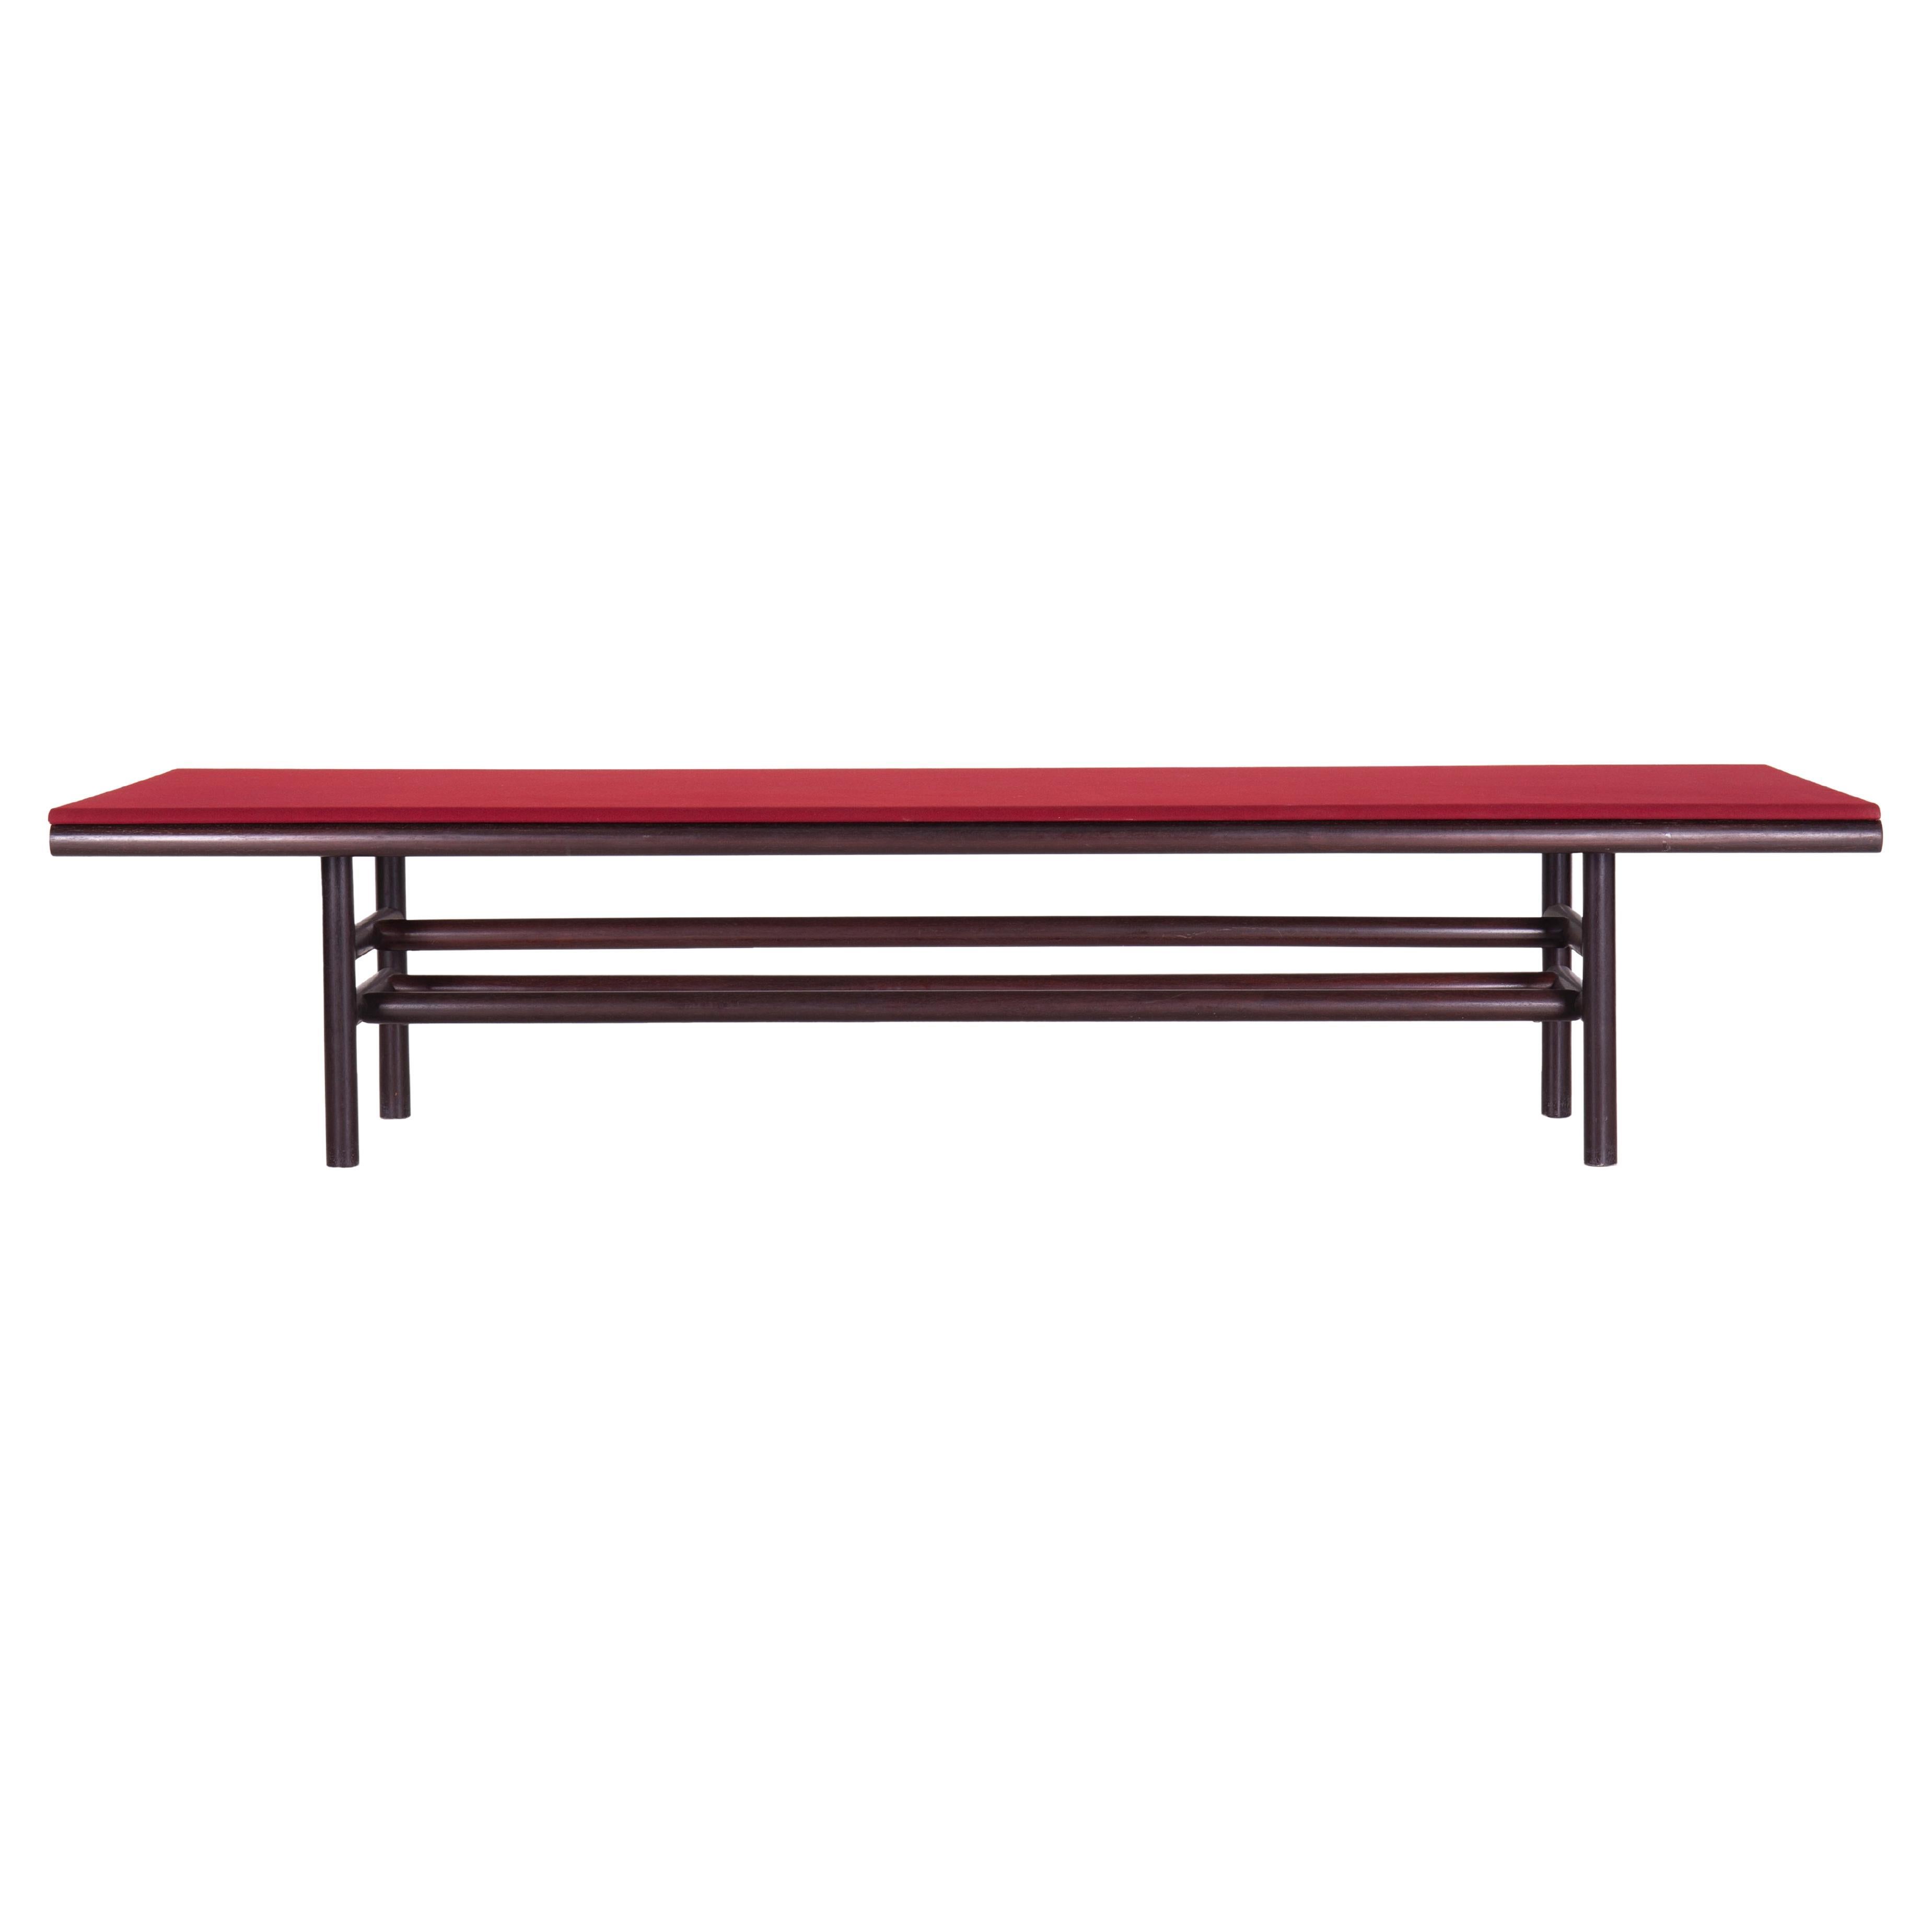 Gritti Table by Carlo Scarpa produced by Simon in 1976 For Sale